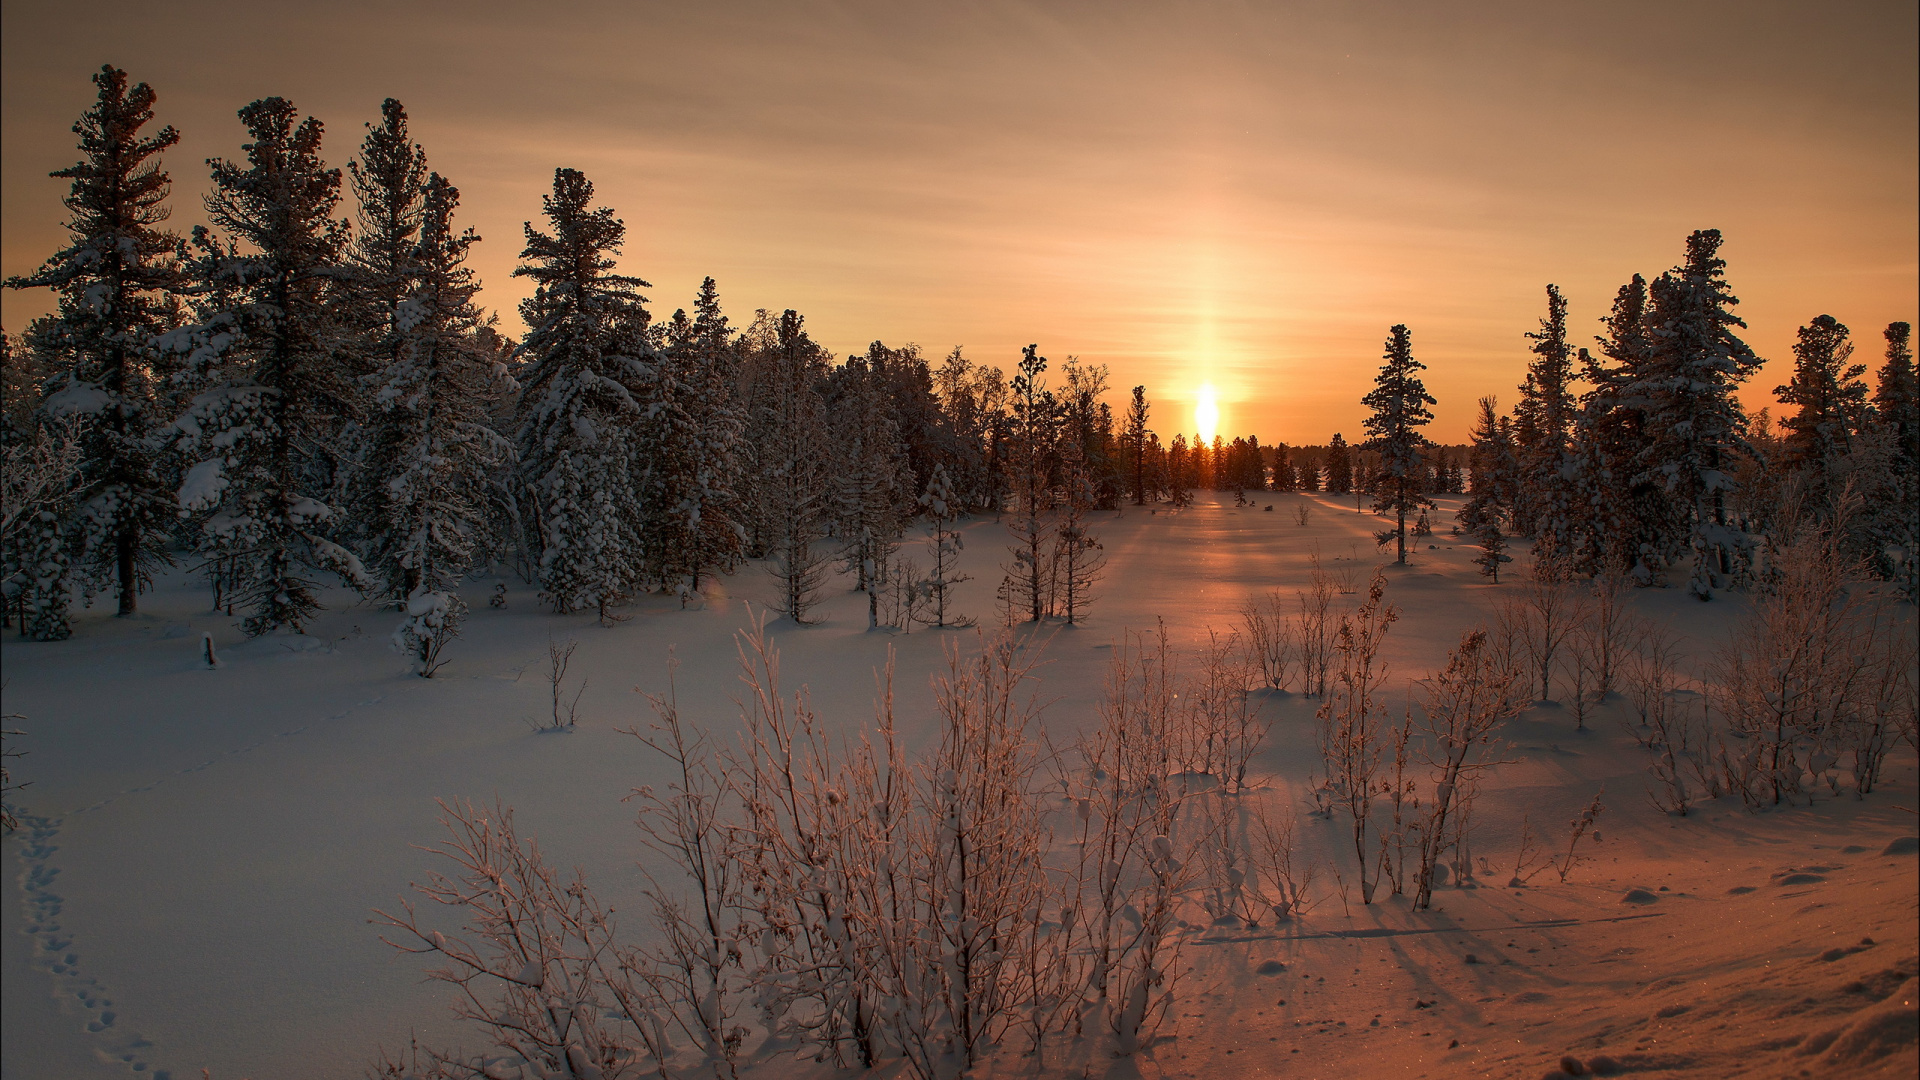 Green Trees on Snow Covered Ground During Sunset. Wallpaper in 1920x1080 Resolution